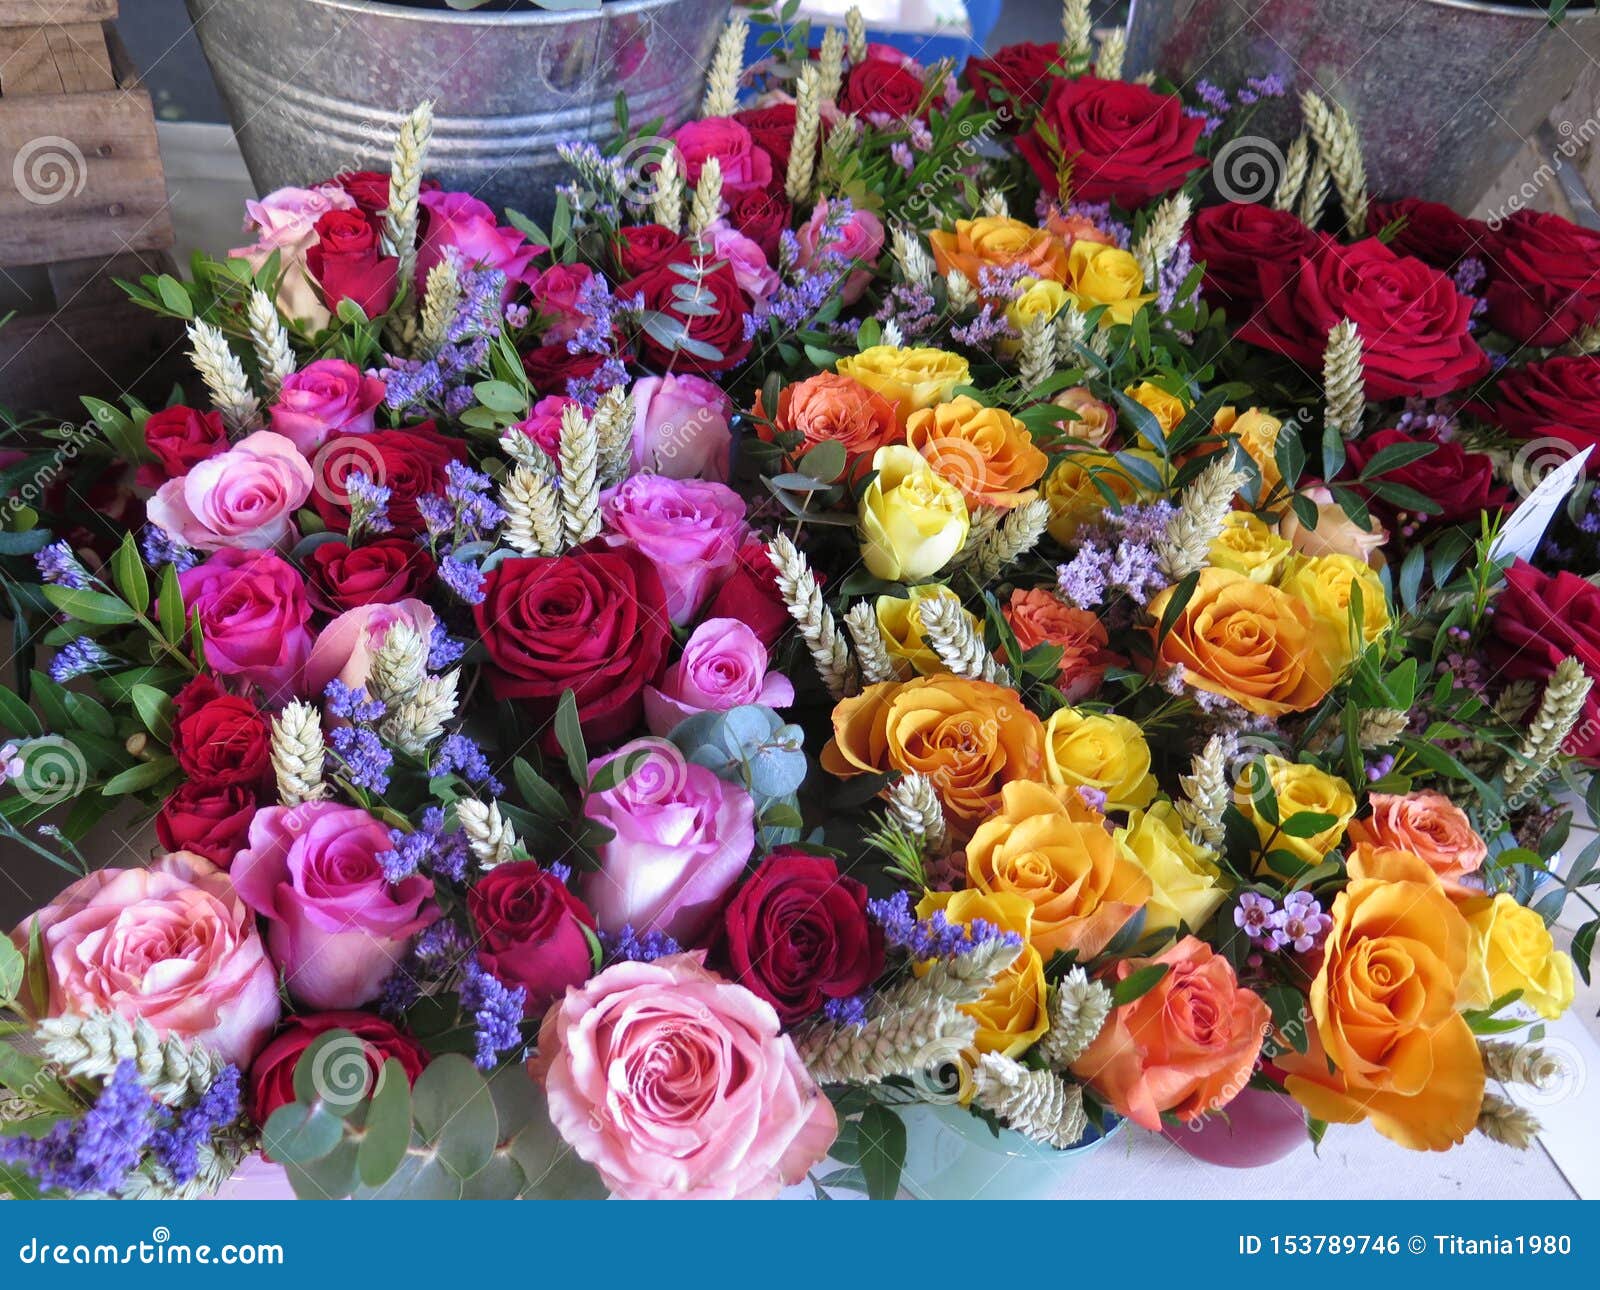 roses in different colores in a street celebration